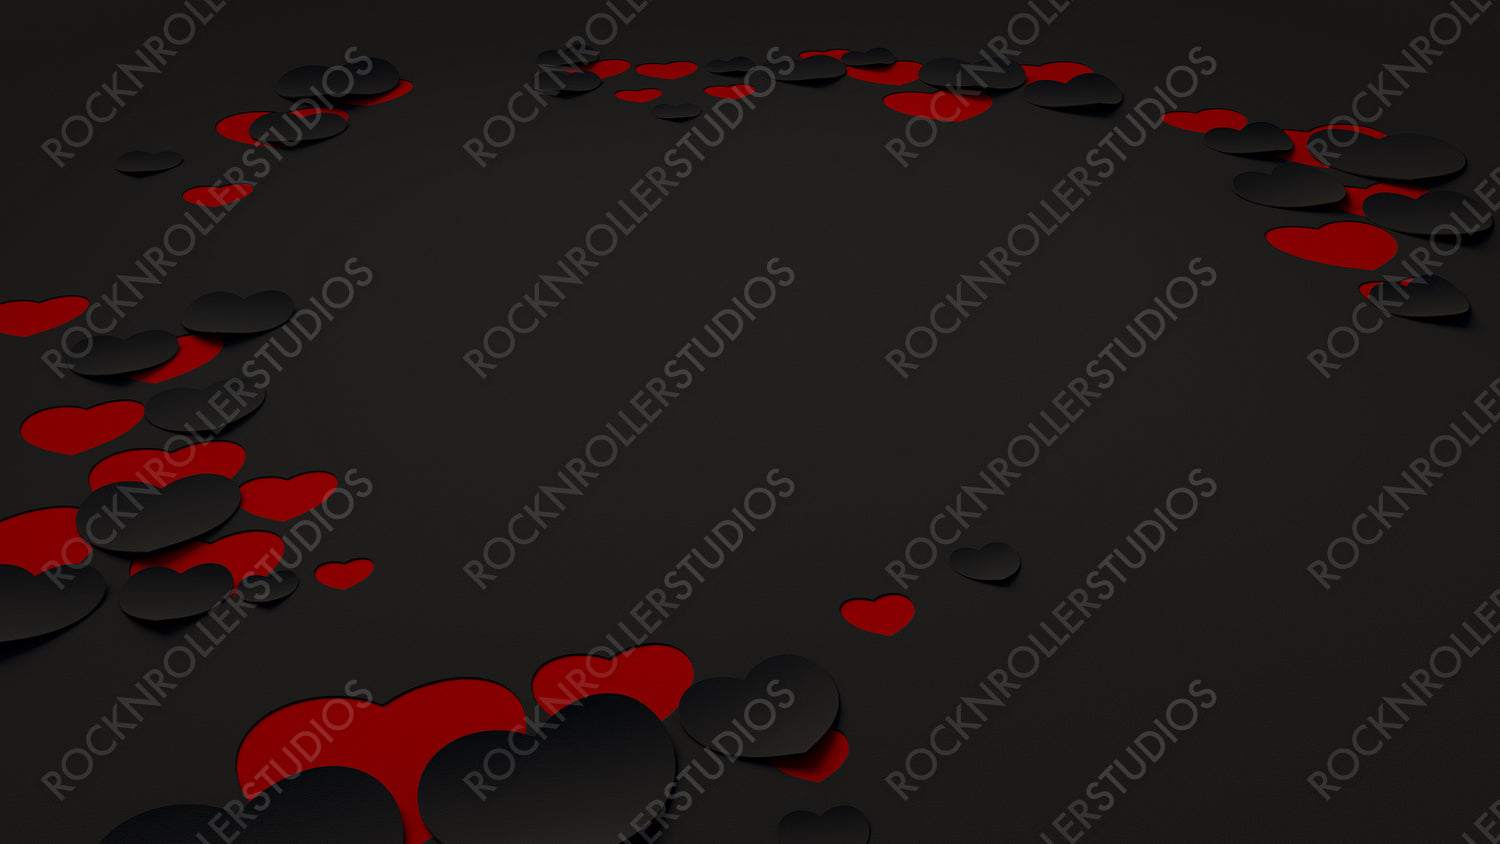 Paper Heart background with copy space. Black and Red Valentine's day Wallpaper with cut-out love hearts.